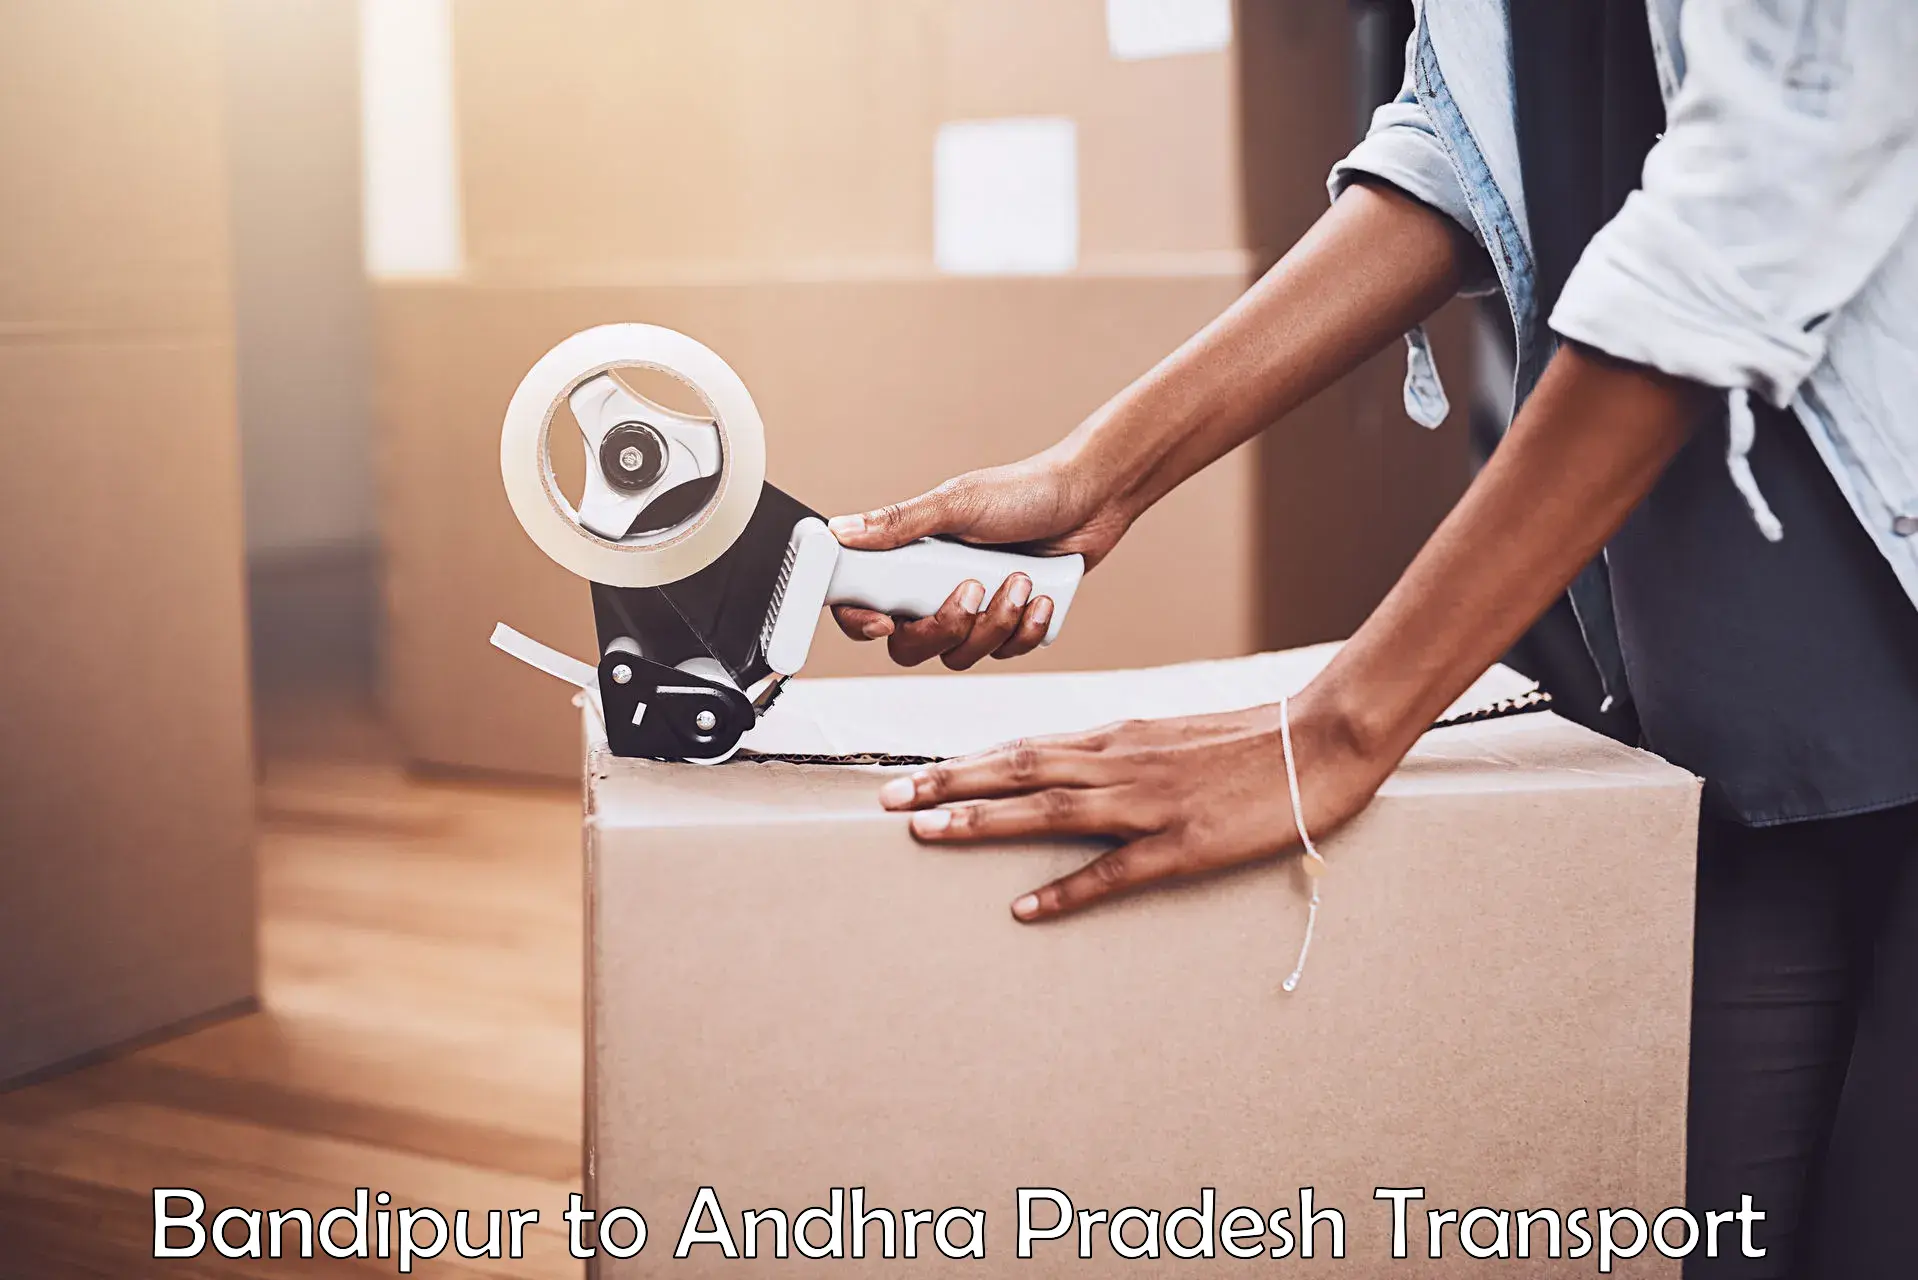 Goods delivery service in Bandipur to Vijayawada